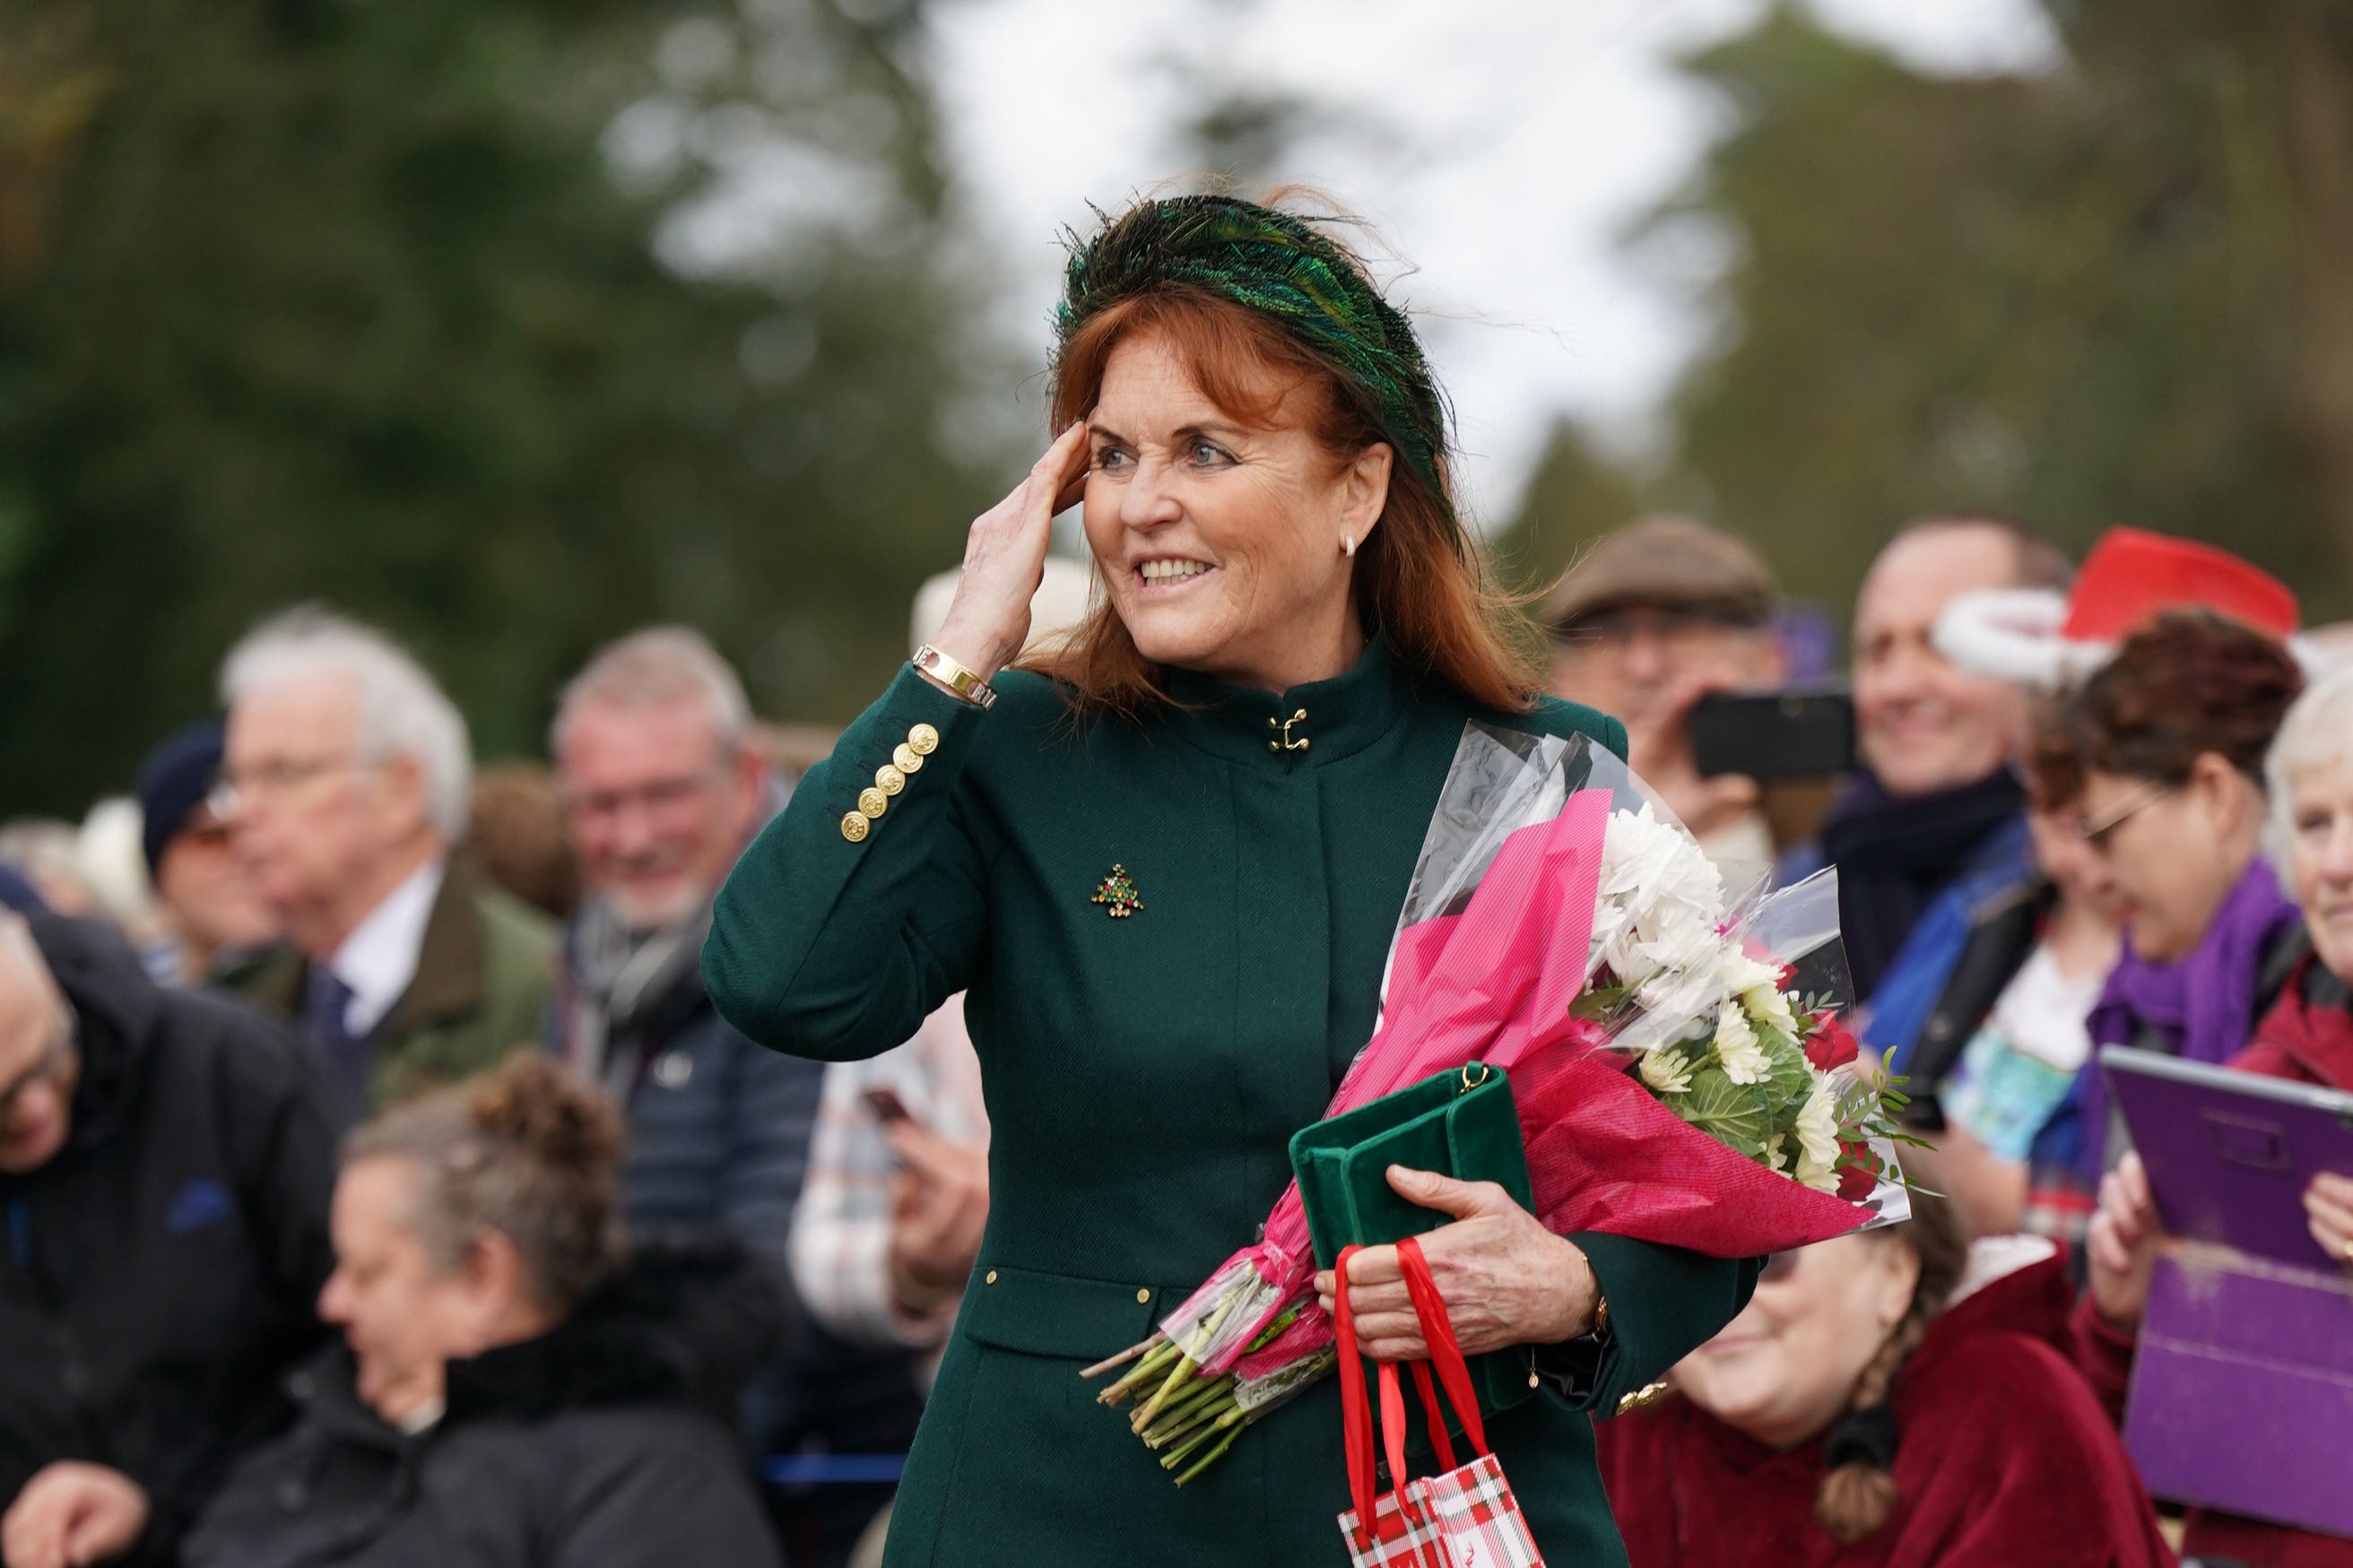 Sarah Ferguson, the Duchess of York, was welcomed back into the Royal family fold this Christmas